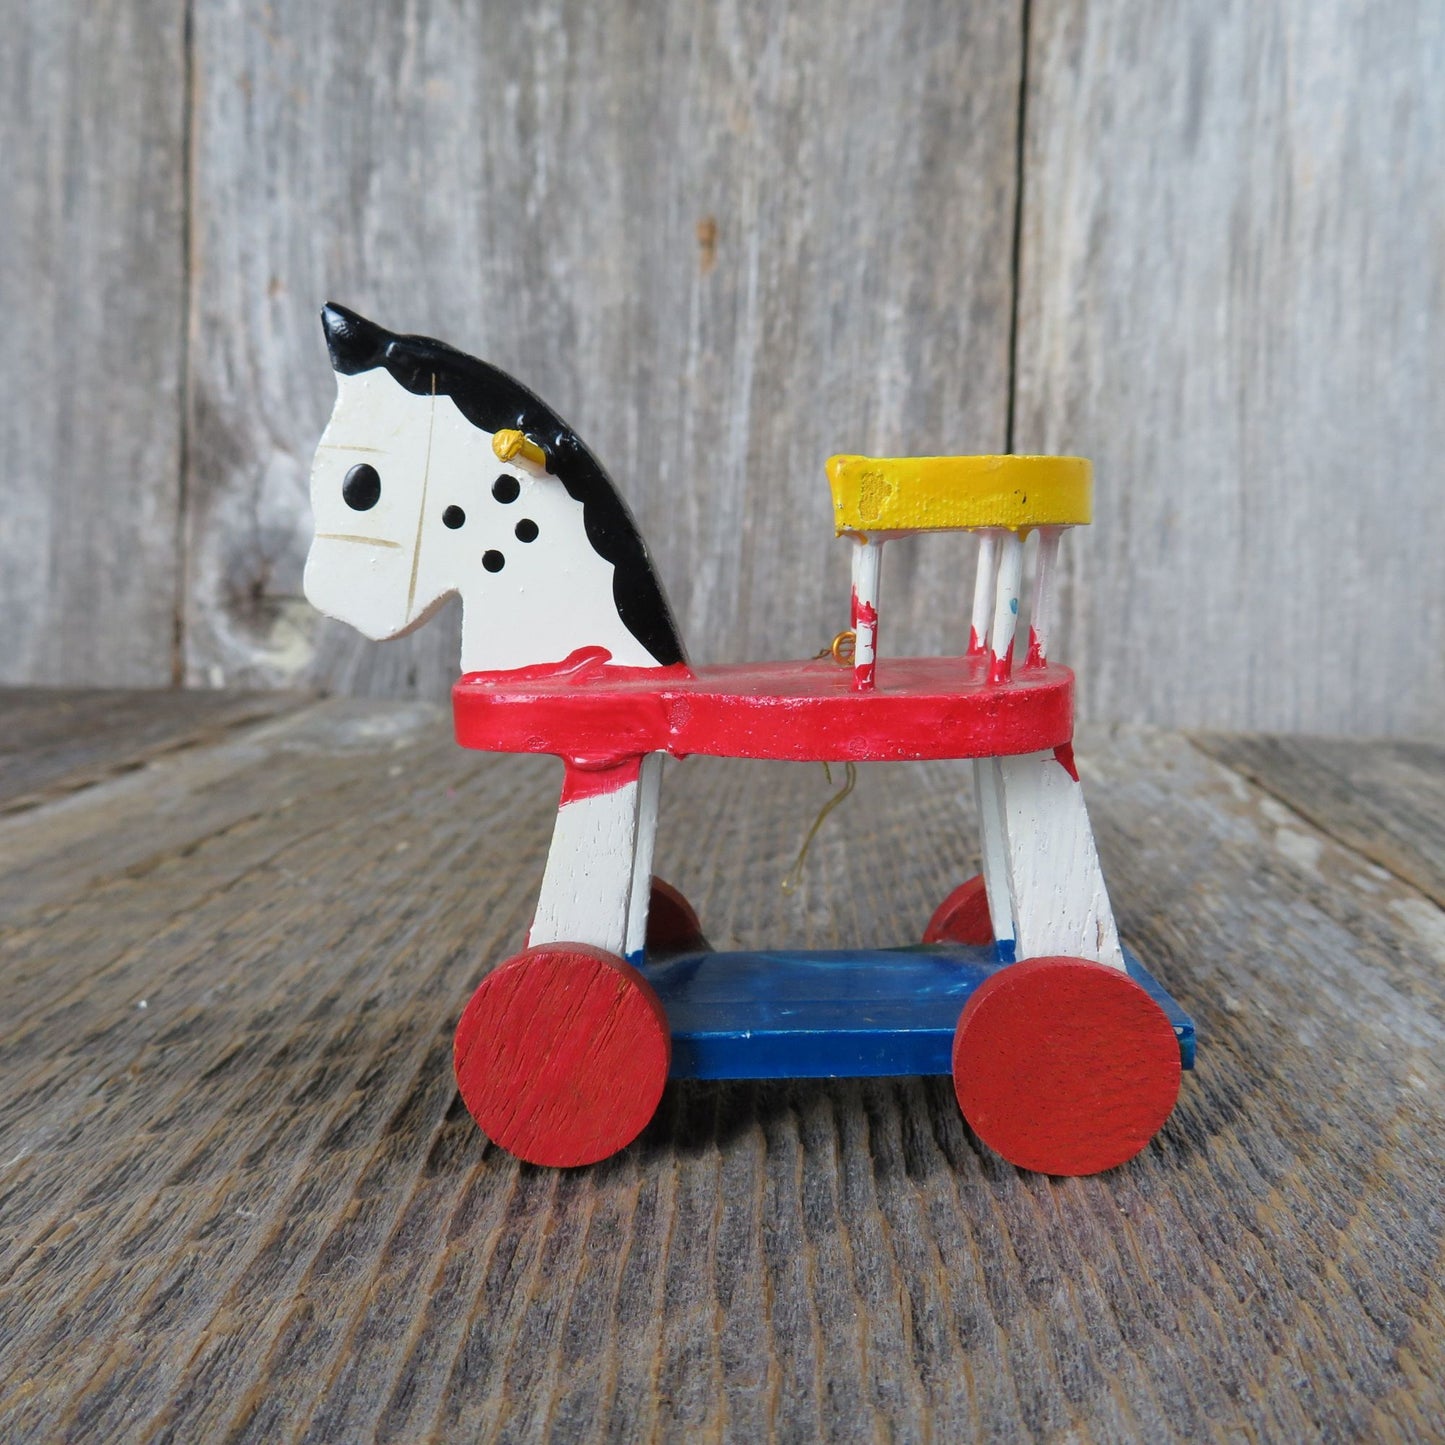 Vintage Wooden Horse with Wheels Ornament Christmas Pony Rocking Rolling Child's Toy Ride on Pony